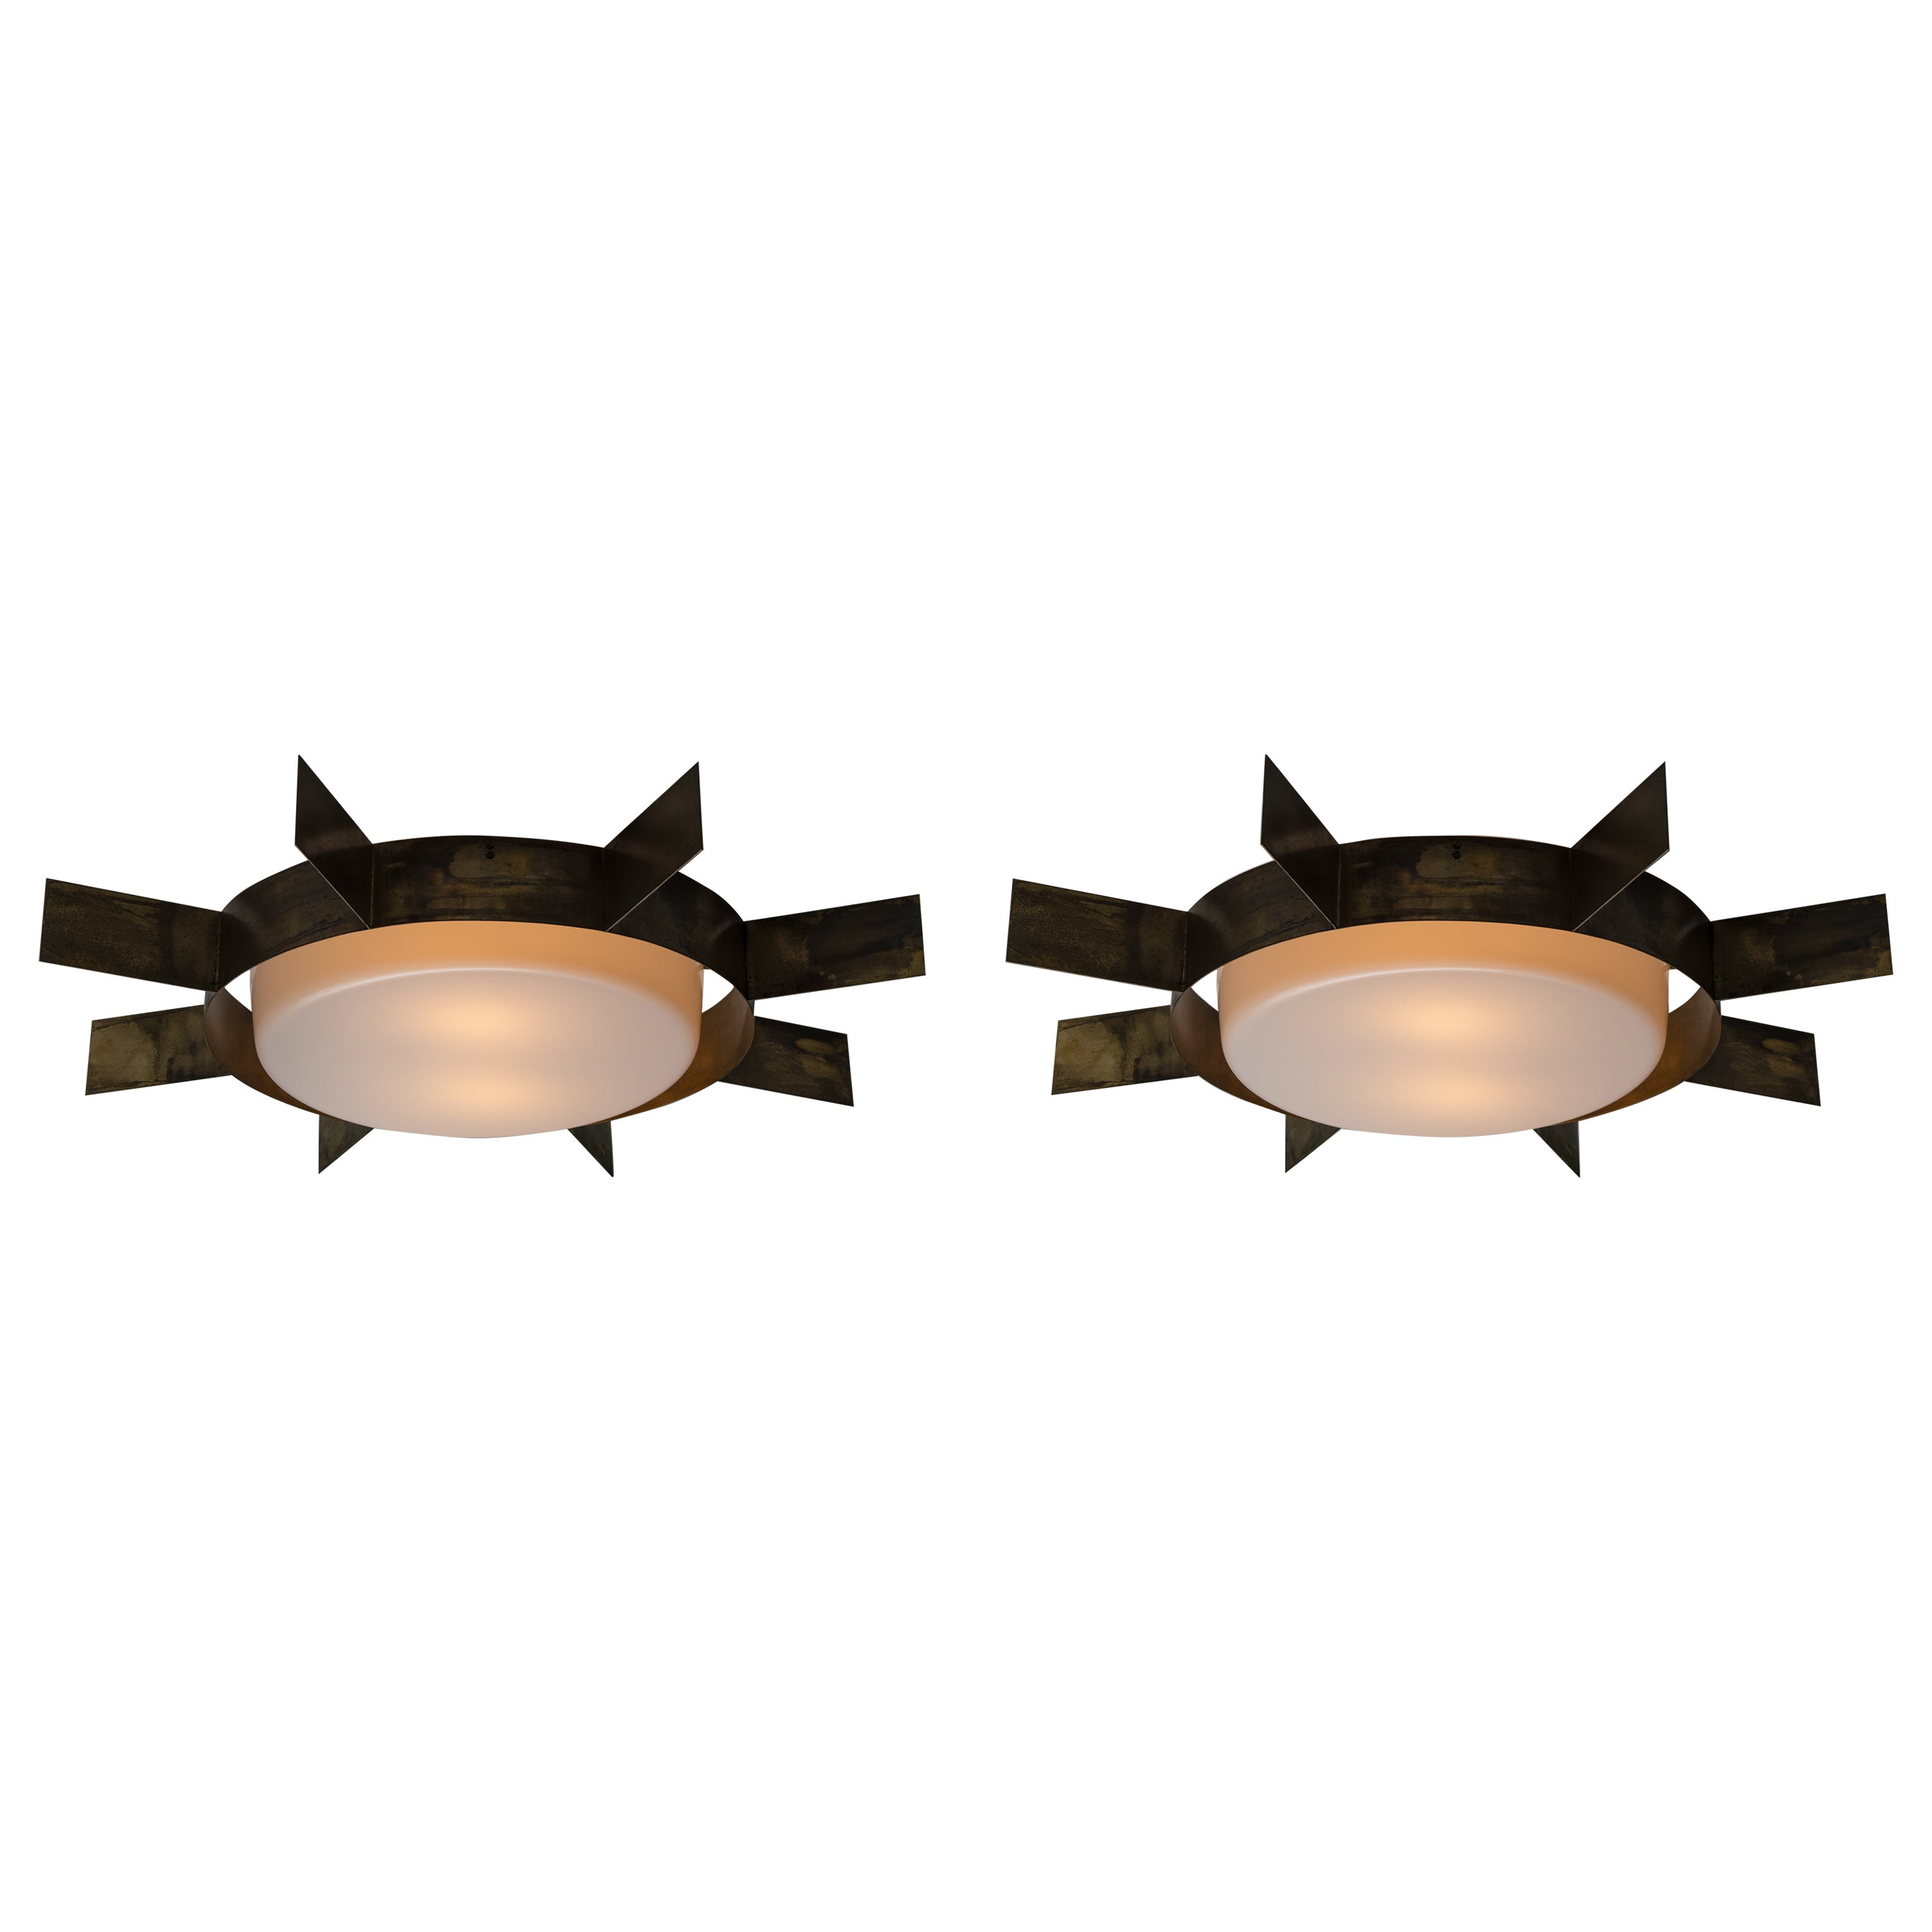 Mod. Sole Flush Mounts by Gio Ponti for Arredoluce. Designed and manufactured in Italy, in 1957. Minimal impressionistic sun flush mounts, composed of a brass frame and acrylic shade. A very rare and iconic piece of Gio Ponti. Each lamp holds two